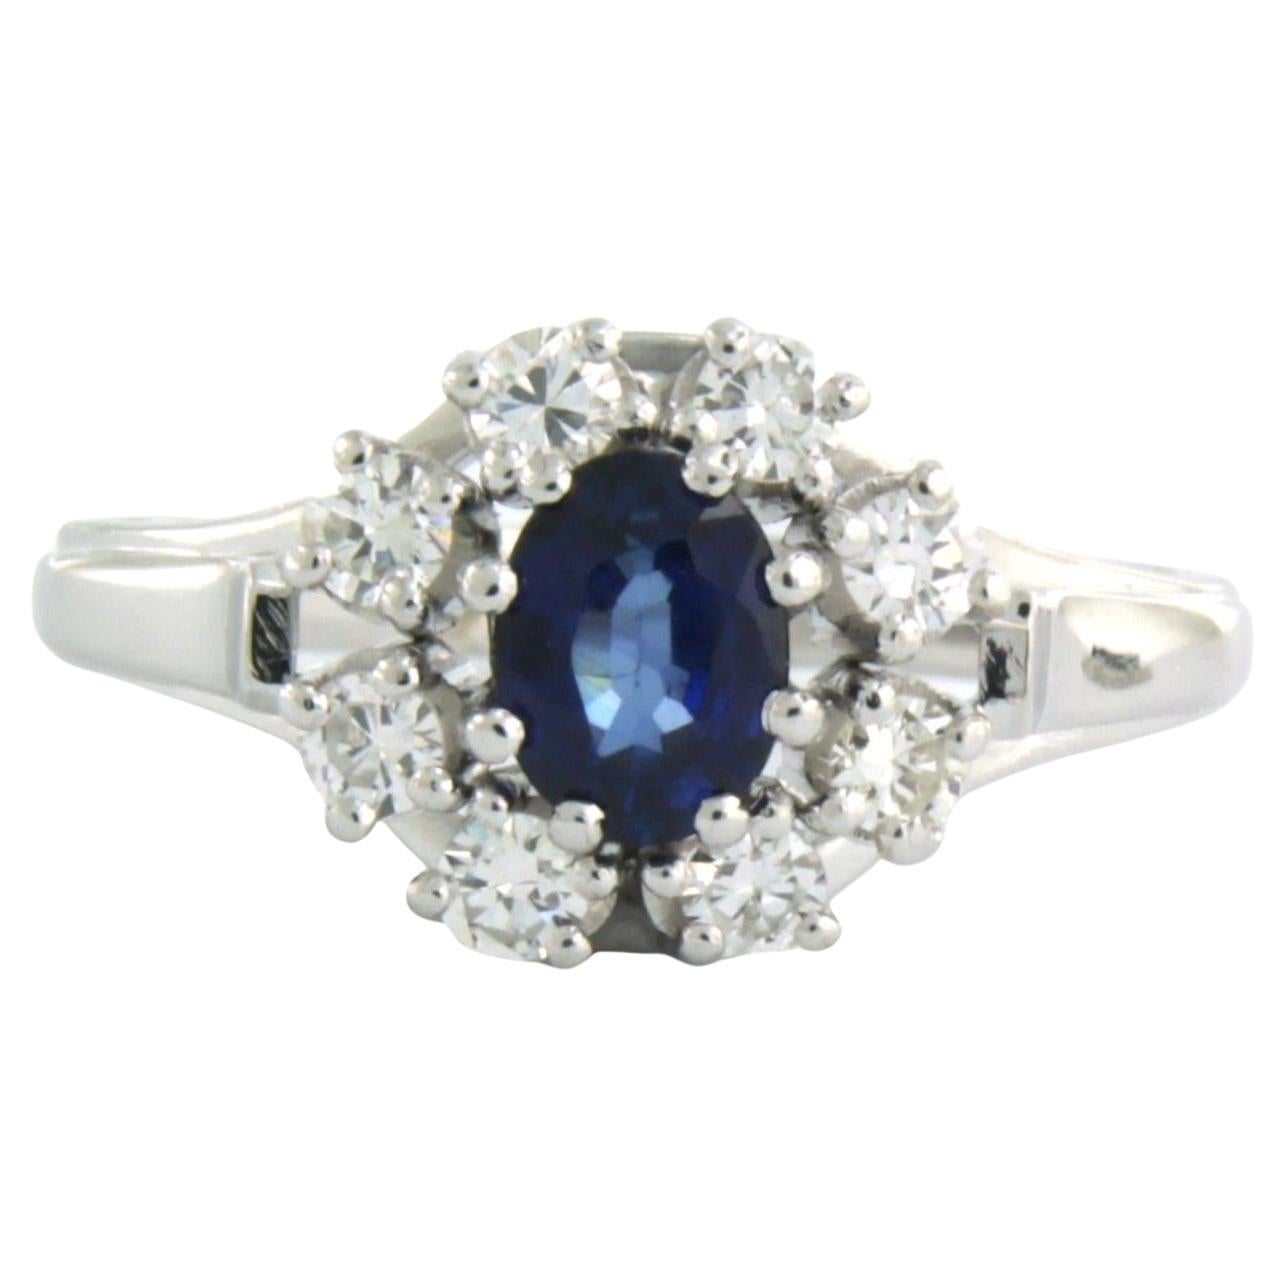 Cluster ring set with Sapphire and diamonds 14k white gold